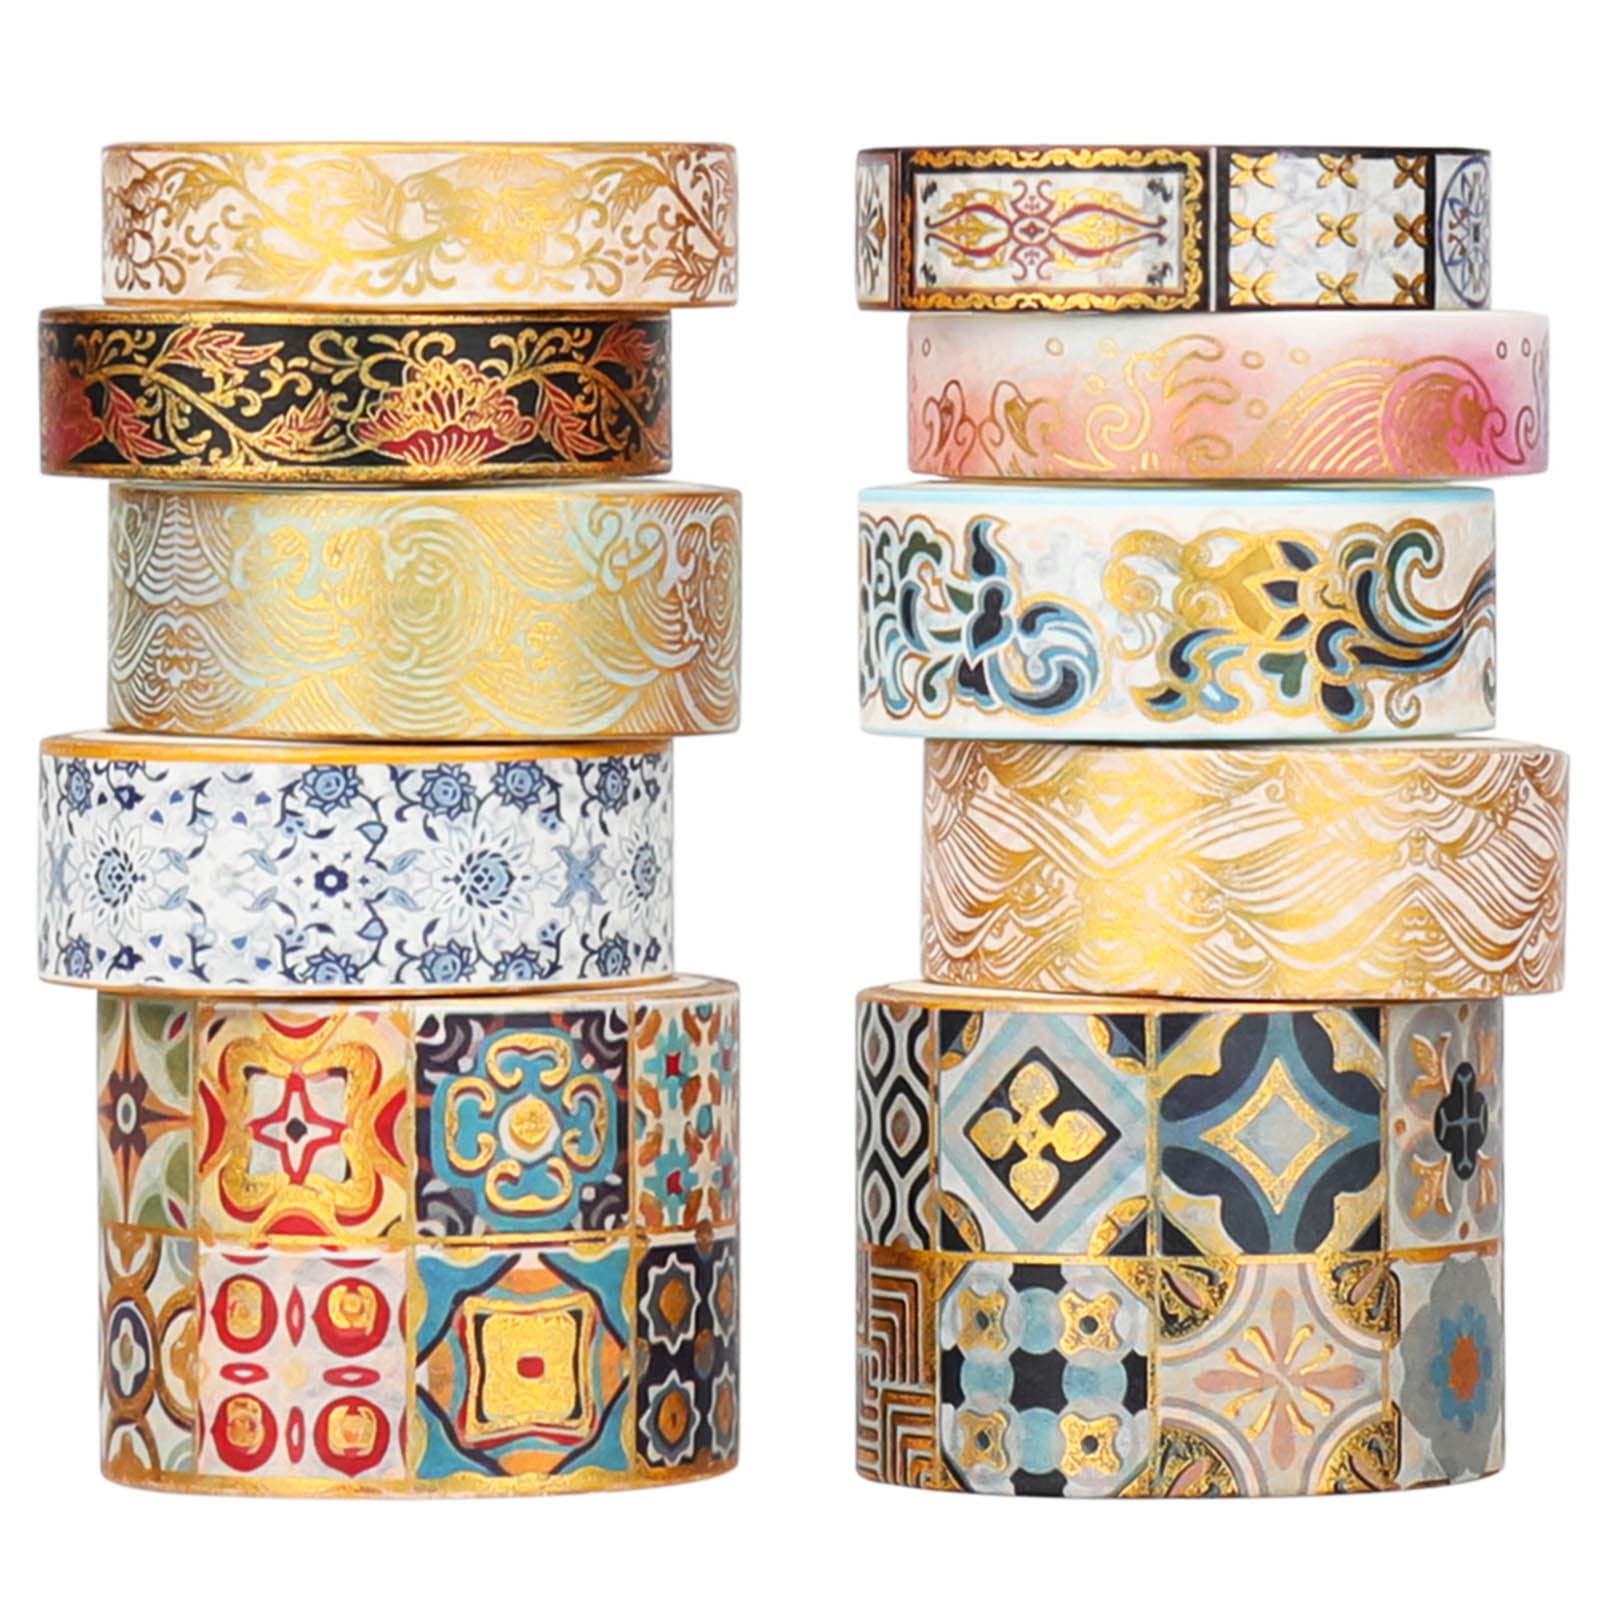 AEBORN Gold Vintage Washi Tape - Aesthetic Decorative Foil Masking Tape Set with Gift Box -Perfect for Bullet Journal, Scrapbook, DIY Crafts